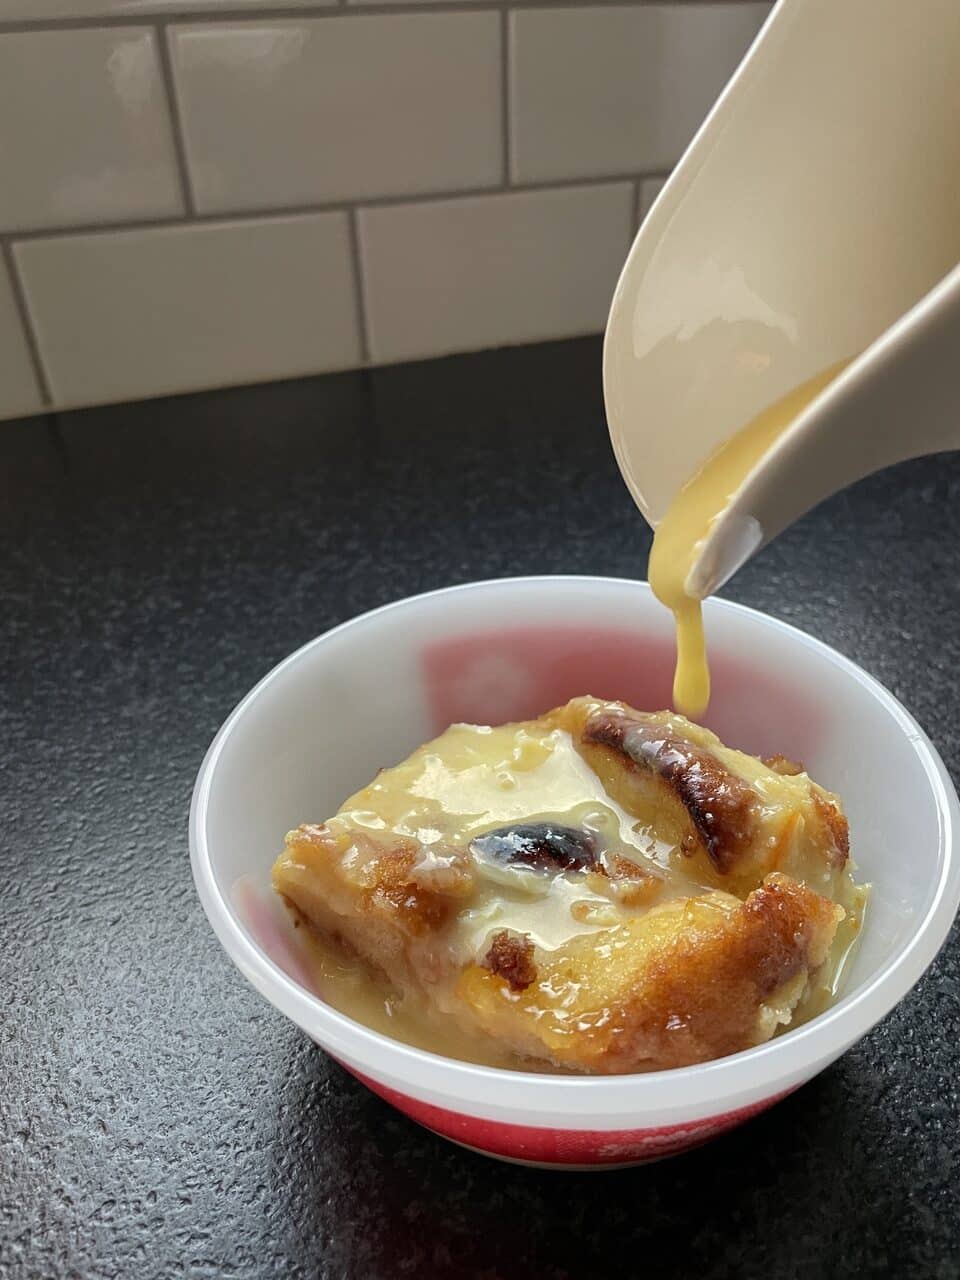 Marmalade Bread Pudding with Whiskey Orange Sauce